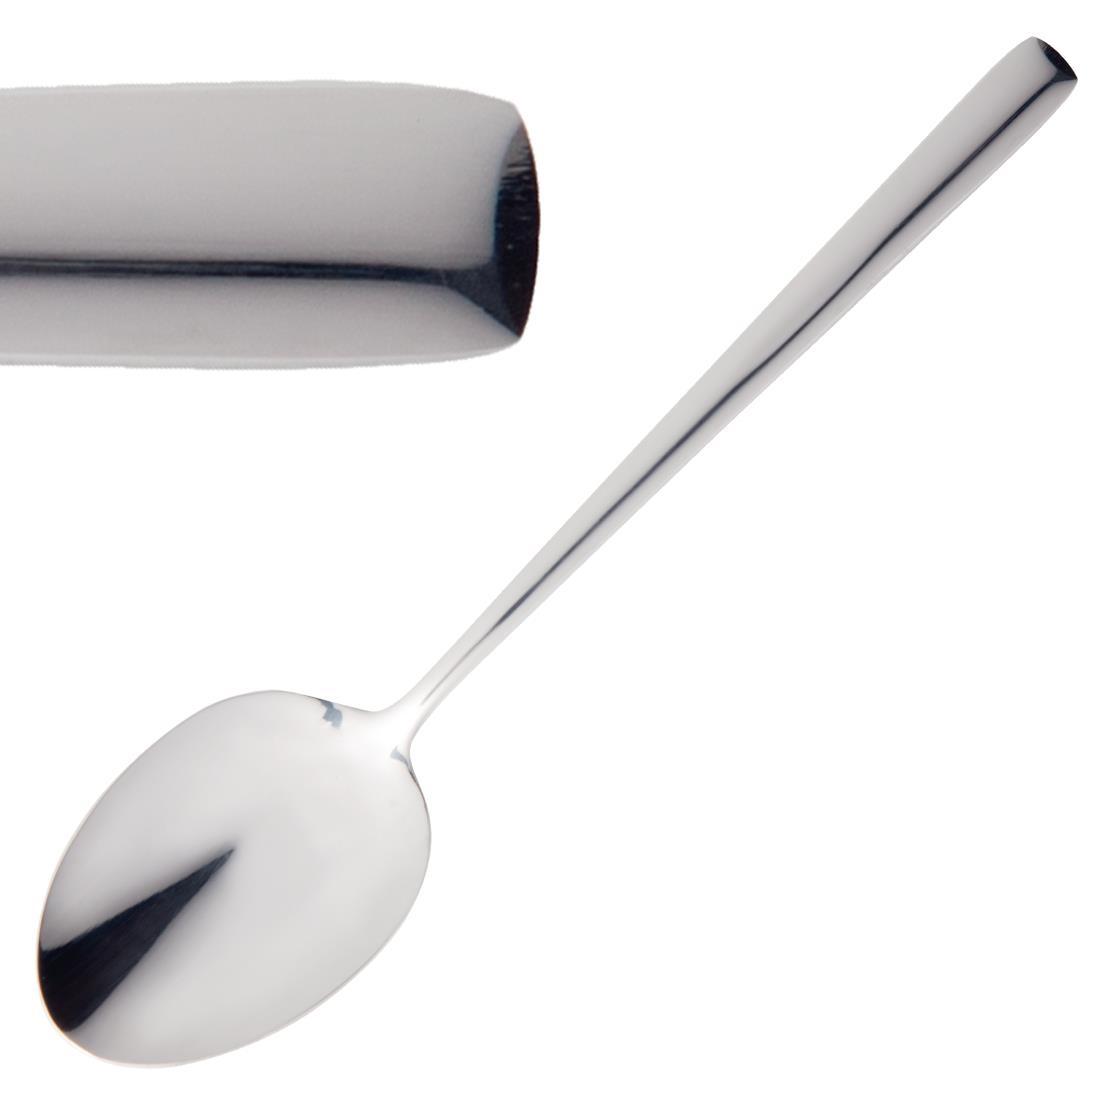 Olympia Ana Dessert Spoon (Pack of 12) - GC632  - 1